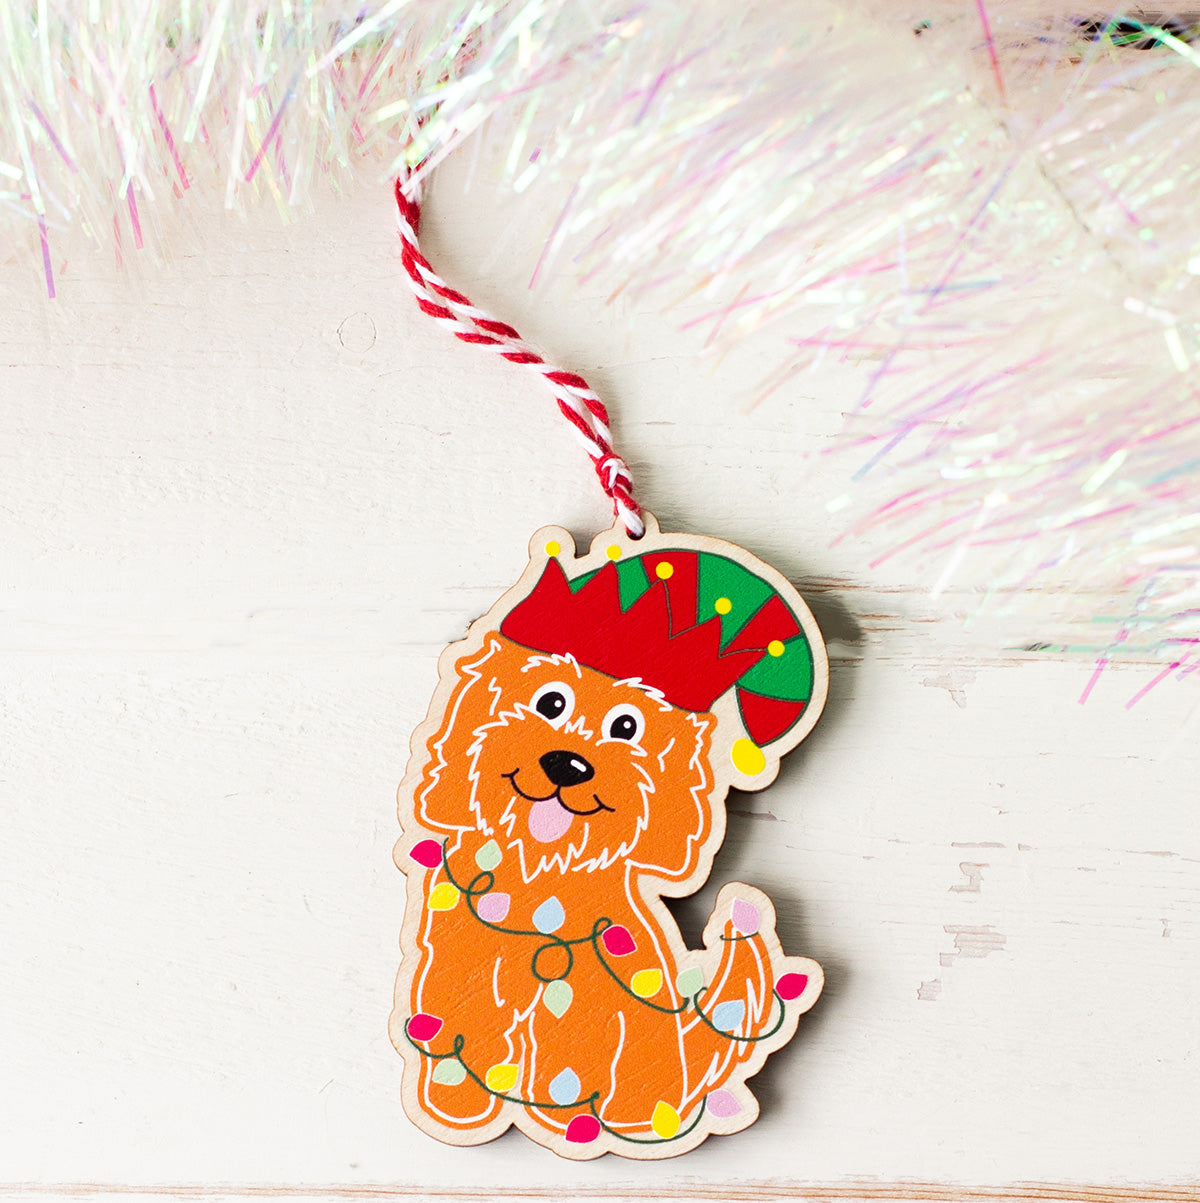 cheeky festive cockapoo christmas decoration illustrated in a gingerbread style printed on to wood with red and white twine